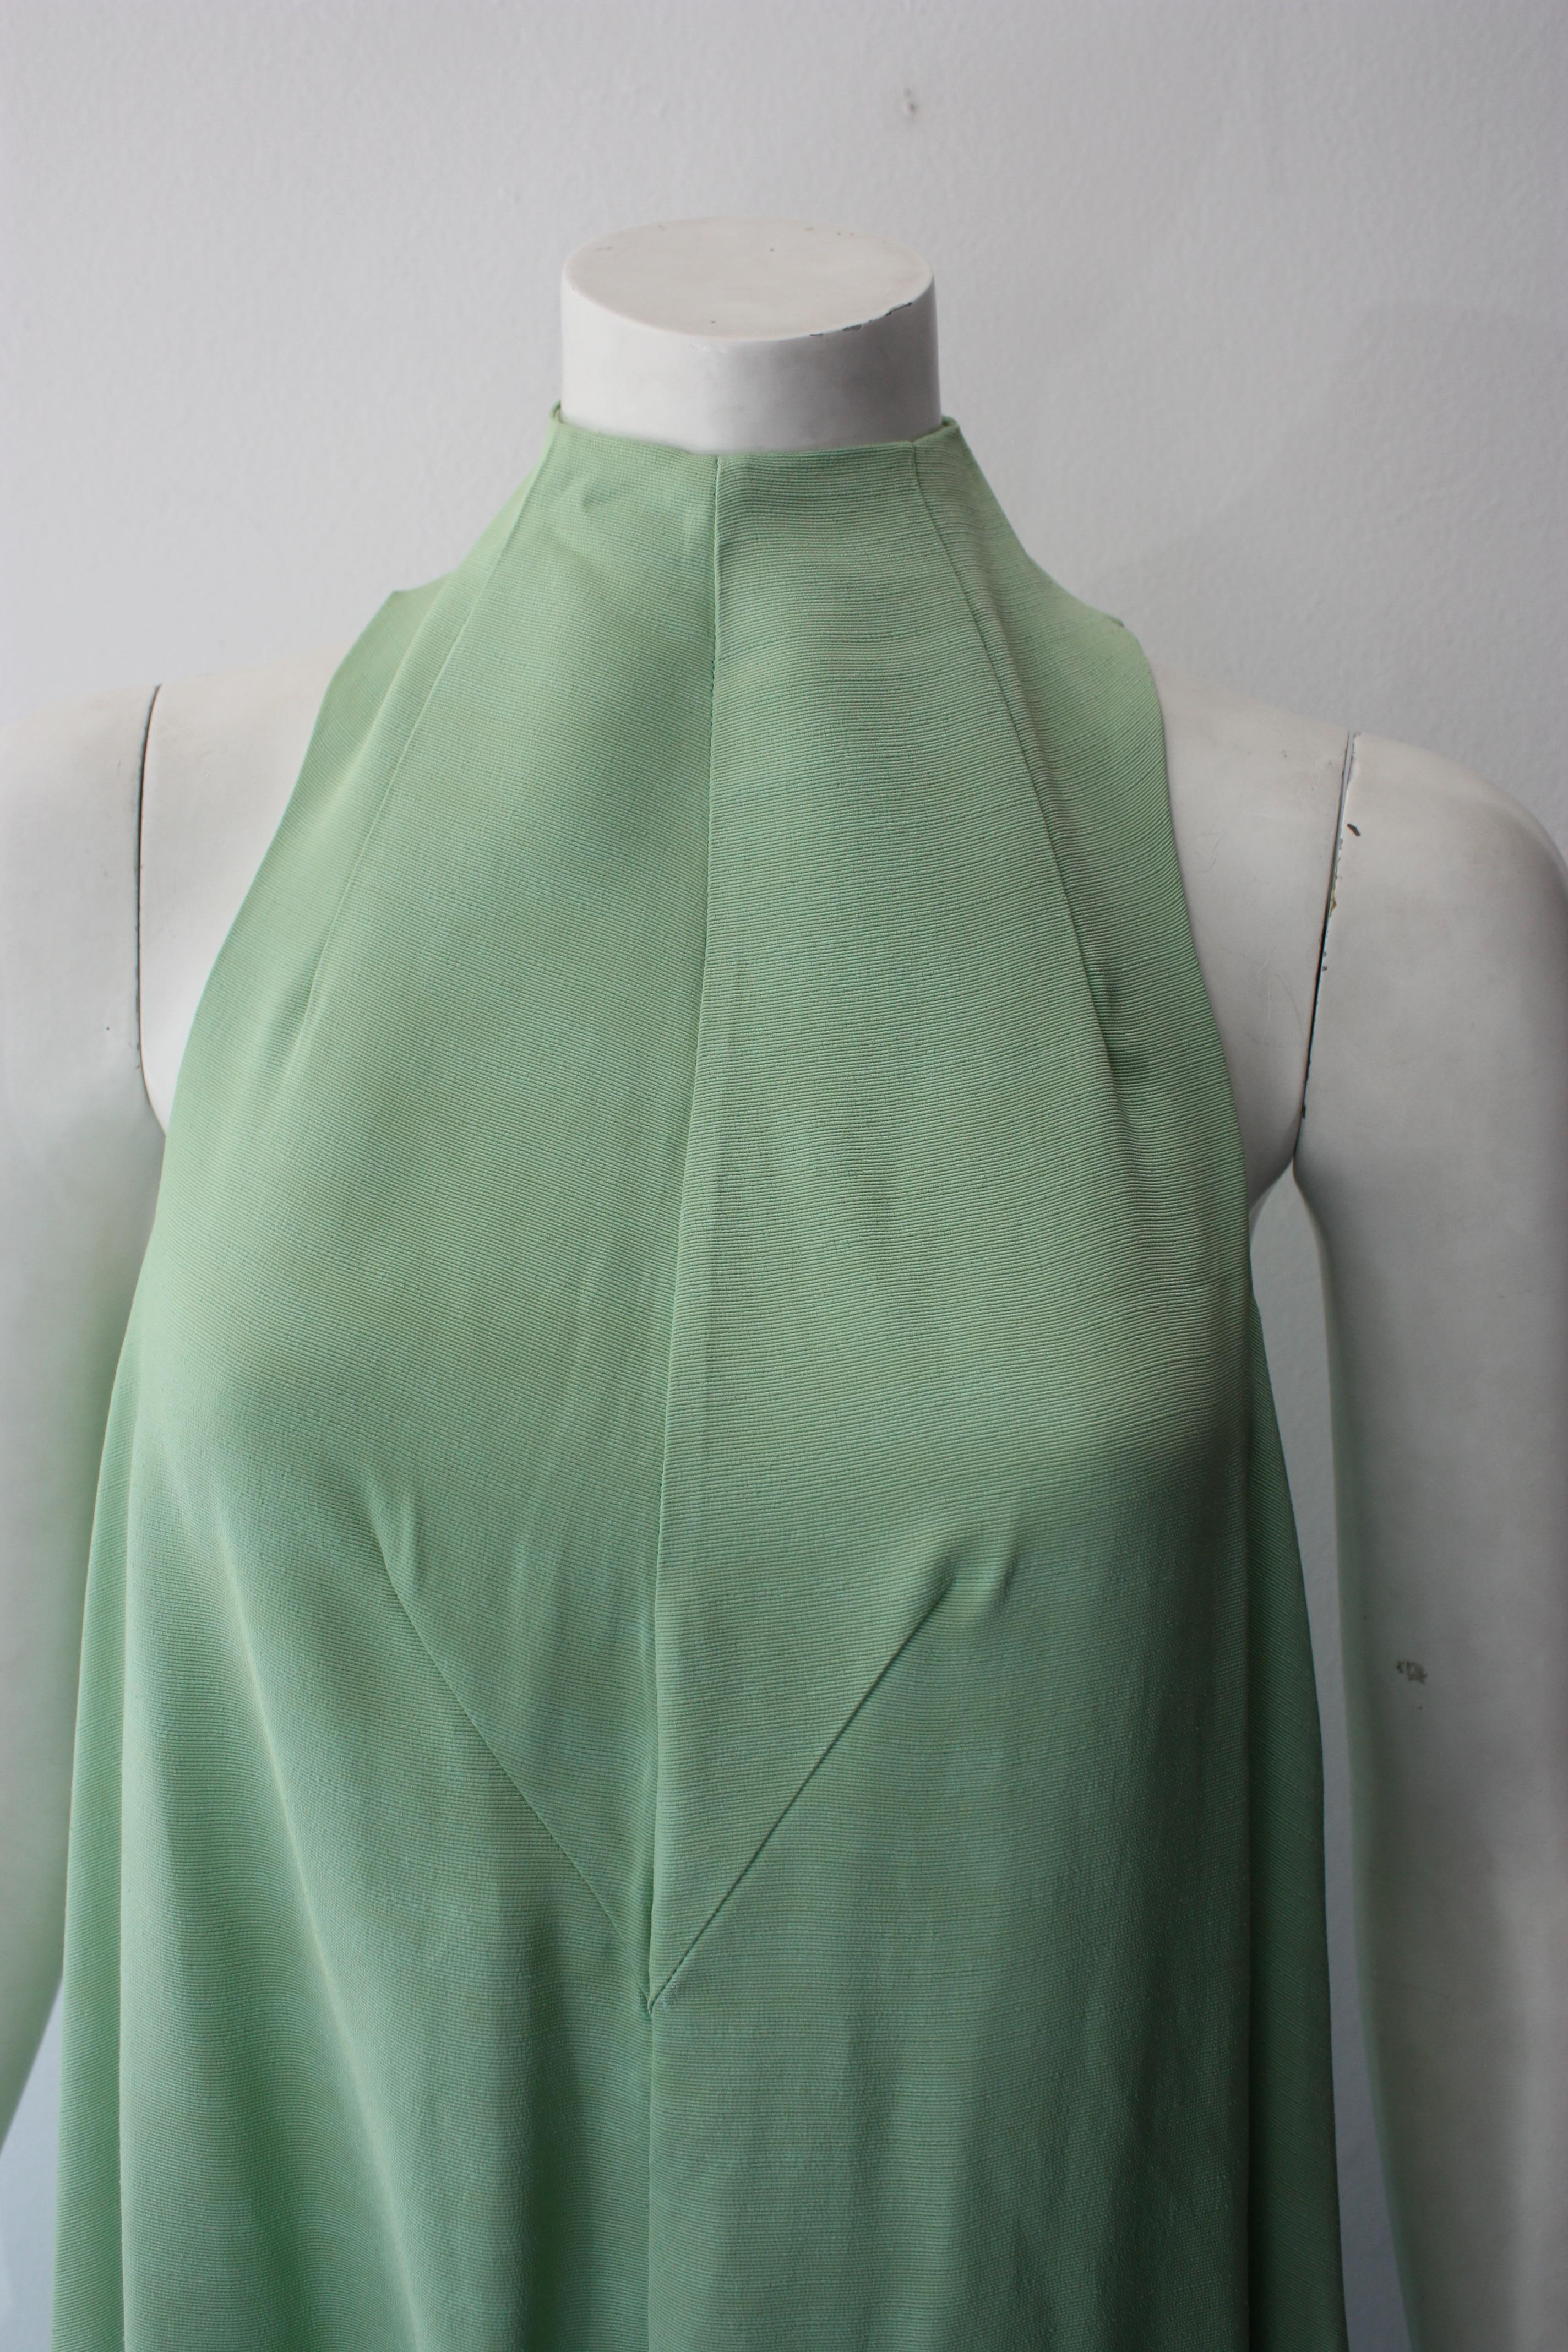 Cult Gaia mint green sleeveless dress. Mock neck. Asymmetrical draped hem. Concealed back zip and back neck tie. 
Size M
100% viscose.
New with tags.